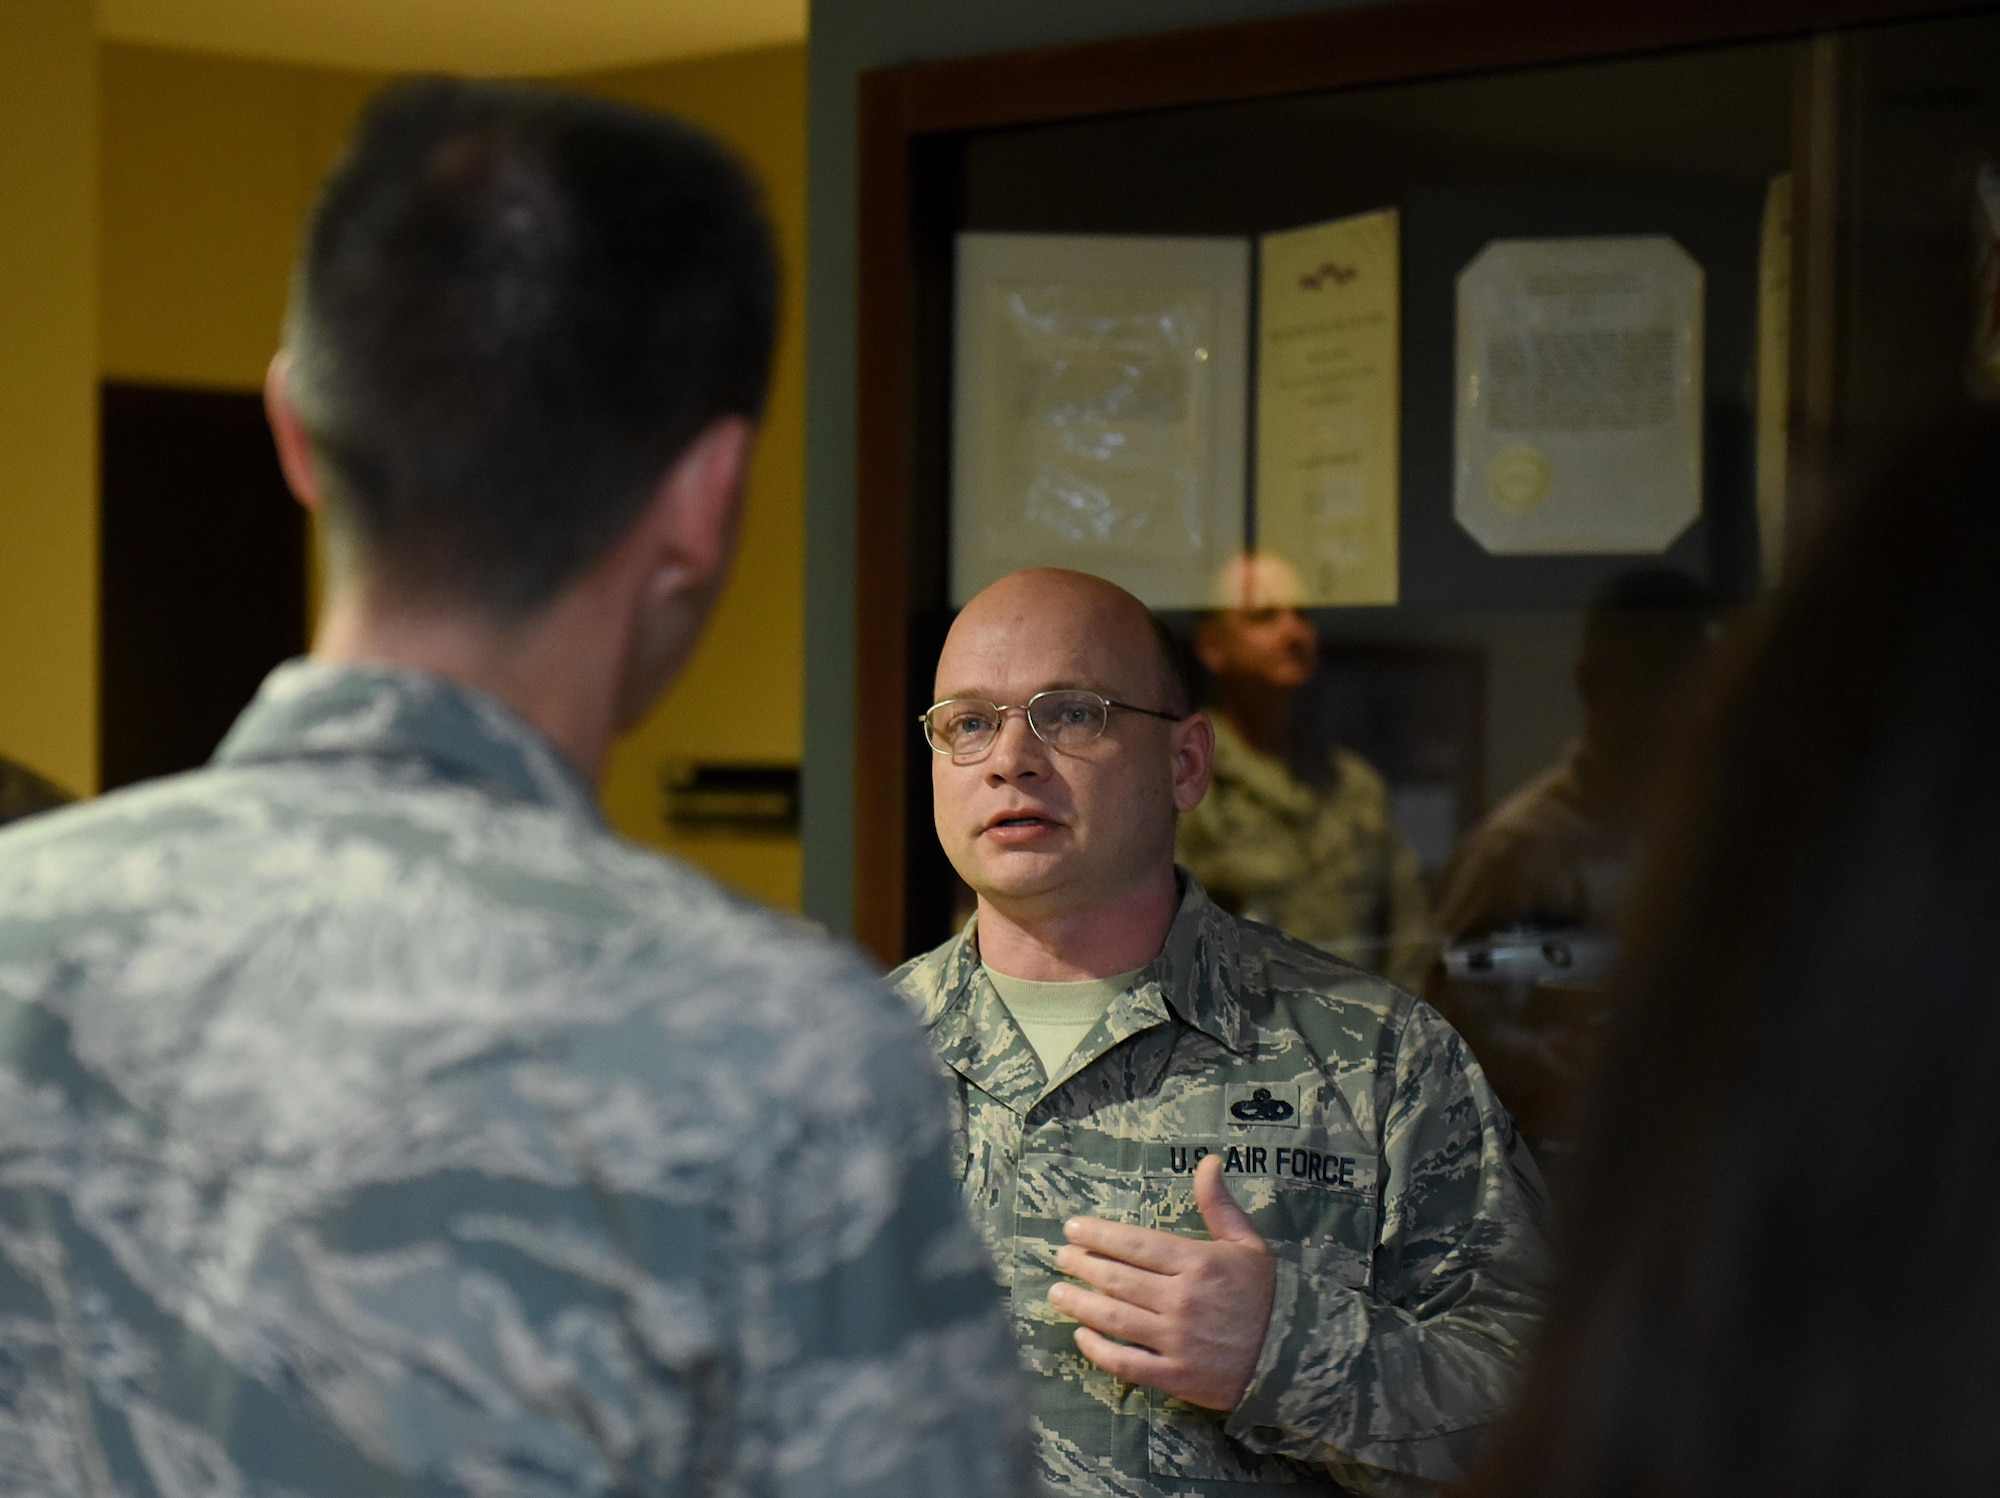 U.S. Air Force Master Sgt. Christopher Murdock (right), 4th Maintenance Group development and instruction section chief, speaks to Maj. Gen. Scott Zobrist, 9th Air Force commander, about the Make It Better computer  club at Seymour Johnson Air Force Base, N.C., Feb. 15, 2017. The Make It Better initiative began in 2014 and encourages members with similar interests and hobbies to join forces to improve morale and camaraderie of Team Seymour Airmen and families. (U.S. Air Force photo by Airman 1st Class Kenneth Boyton)